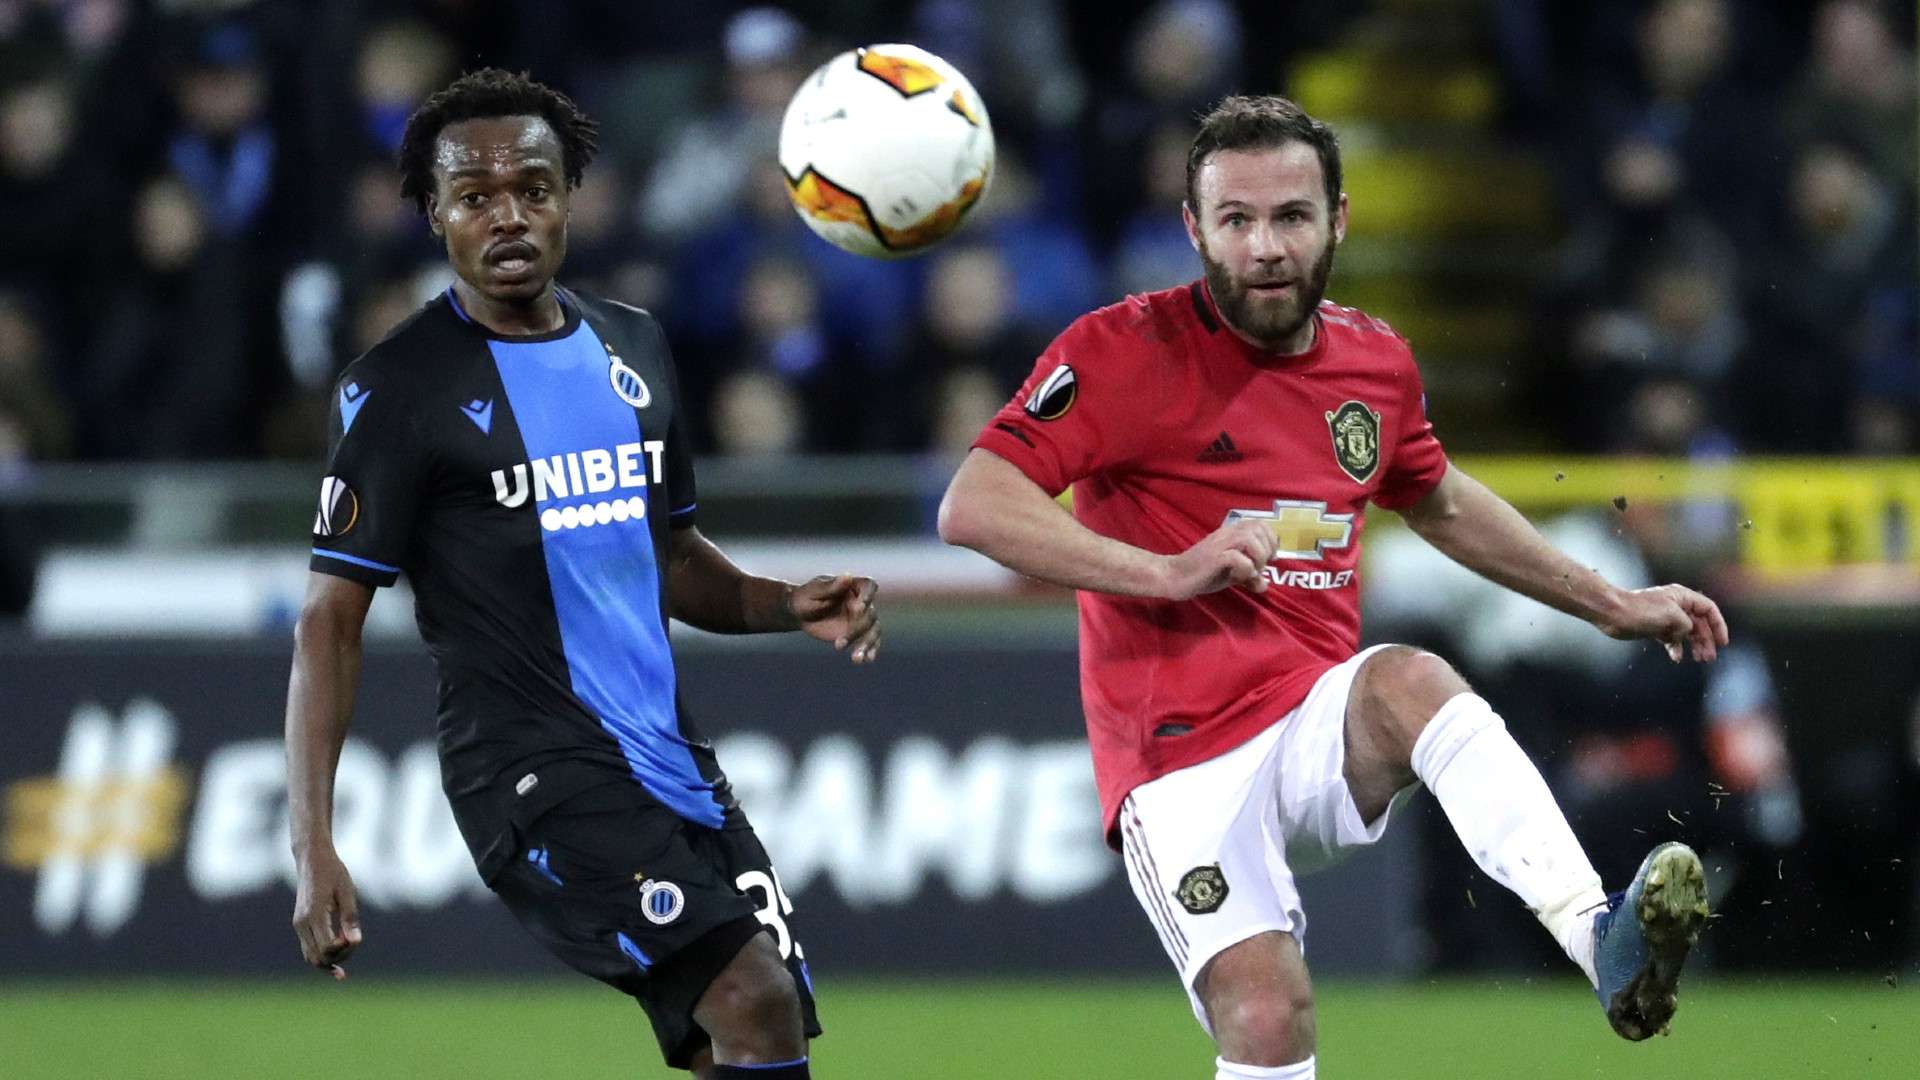 Percy Tau of Brugge (L) in action against Juan Mata of Manchester United (R), February 2020